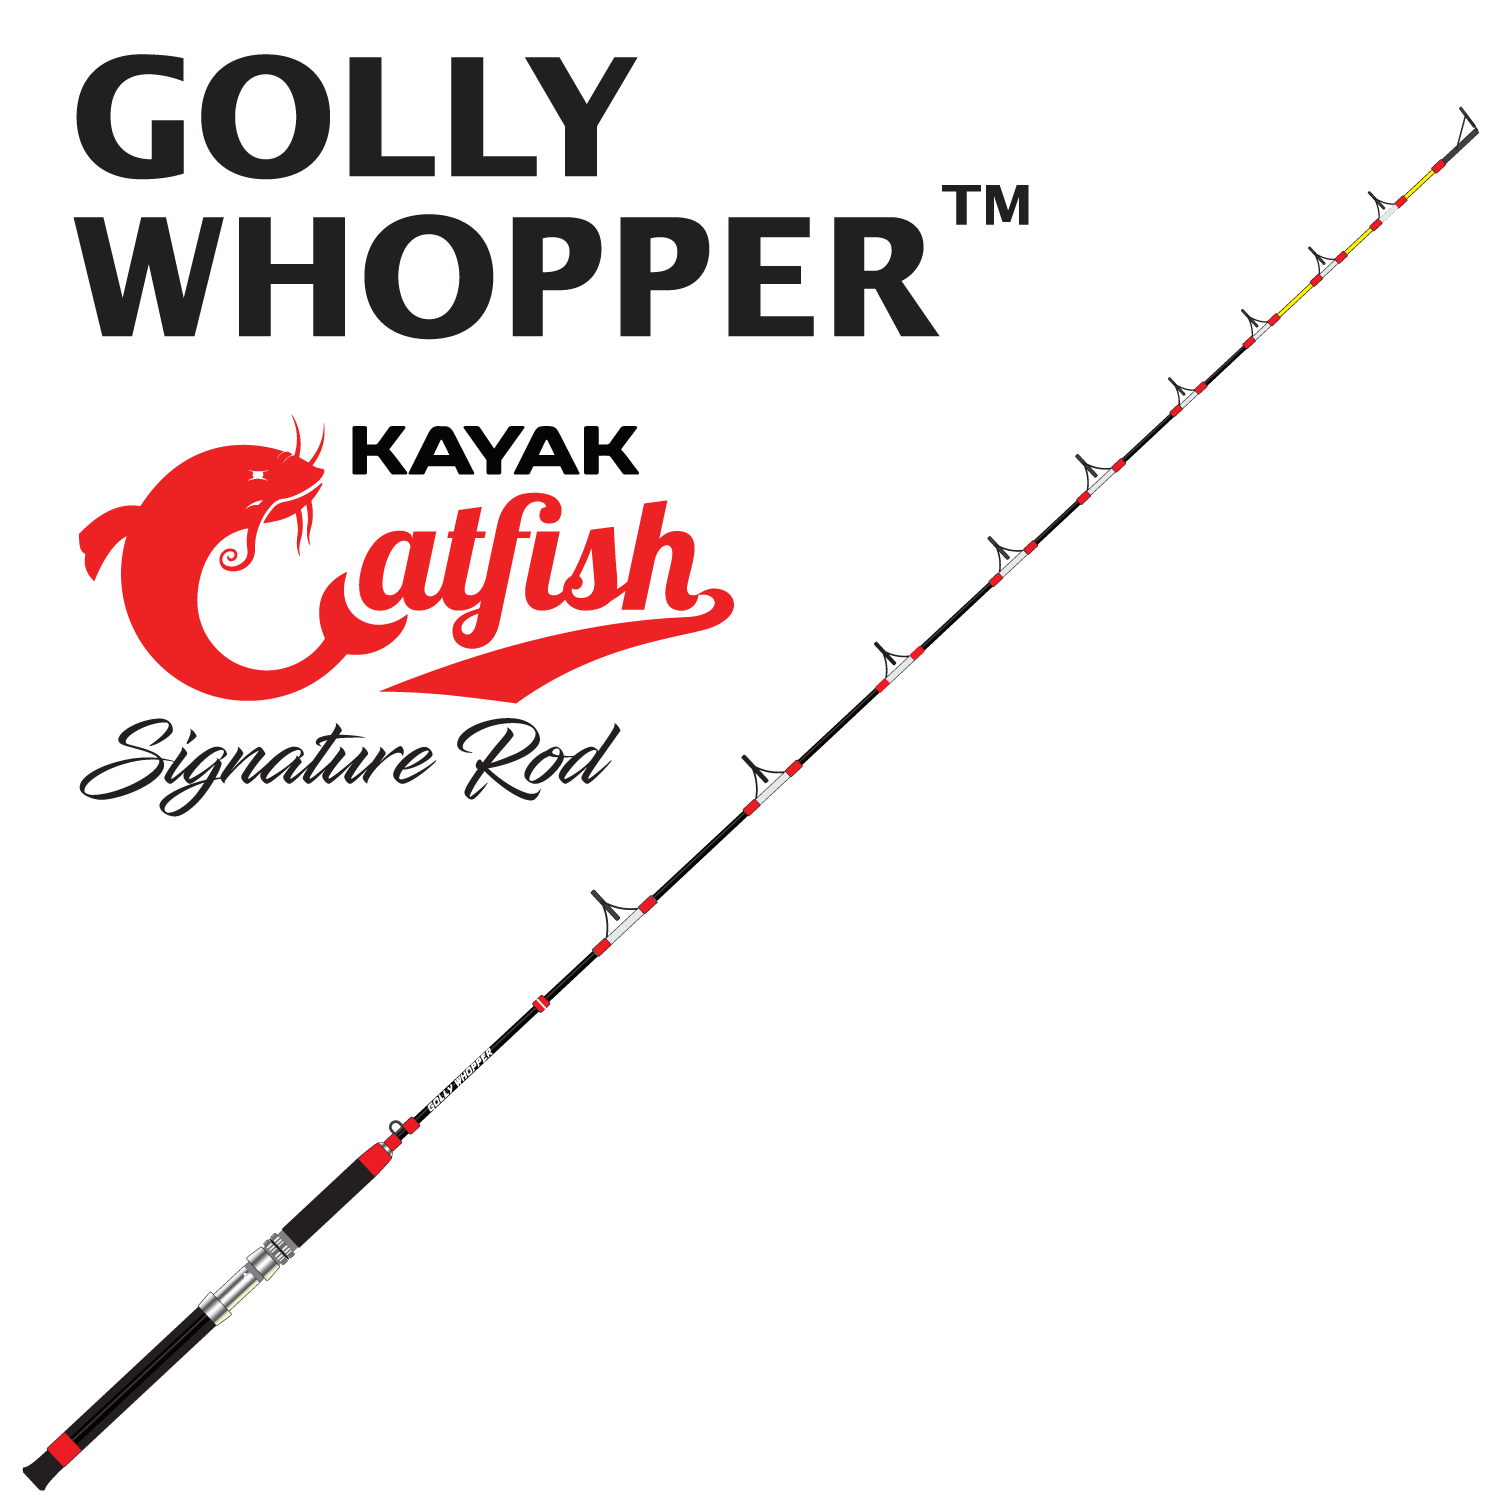 Golly Whopper: Kayak Catfish Signature Rod, Medium Heavy with 3 Handles for Kayak, Boat, and Bank